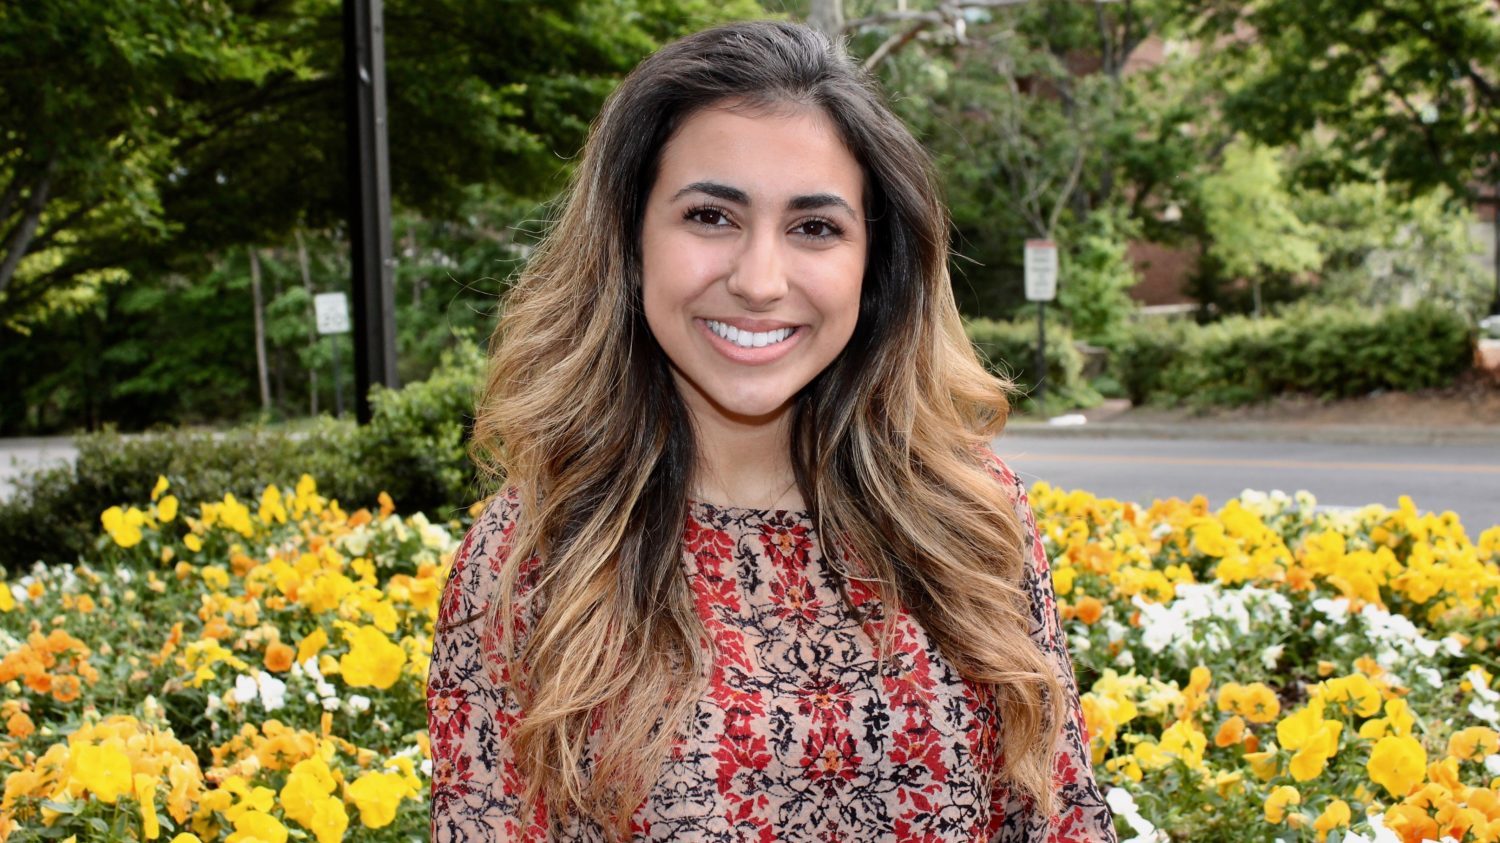 Sofia Abdo BSC Associate and Business Administration/Marketing Undergraduate student at Poole College of Management